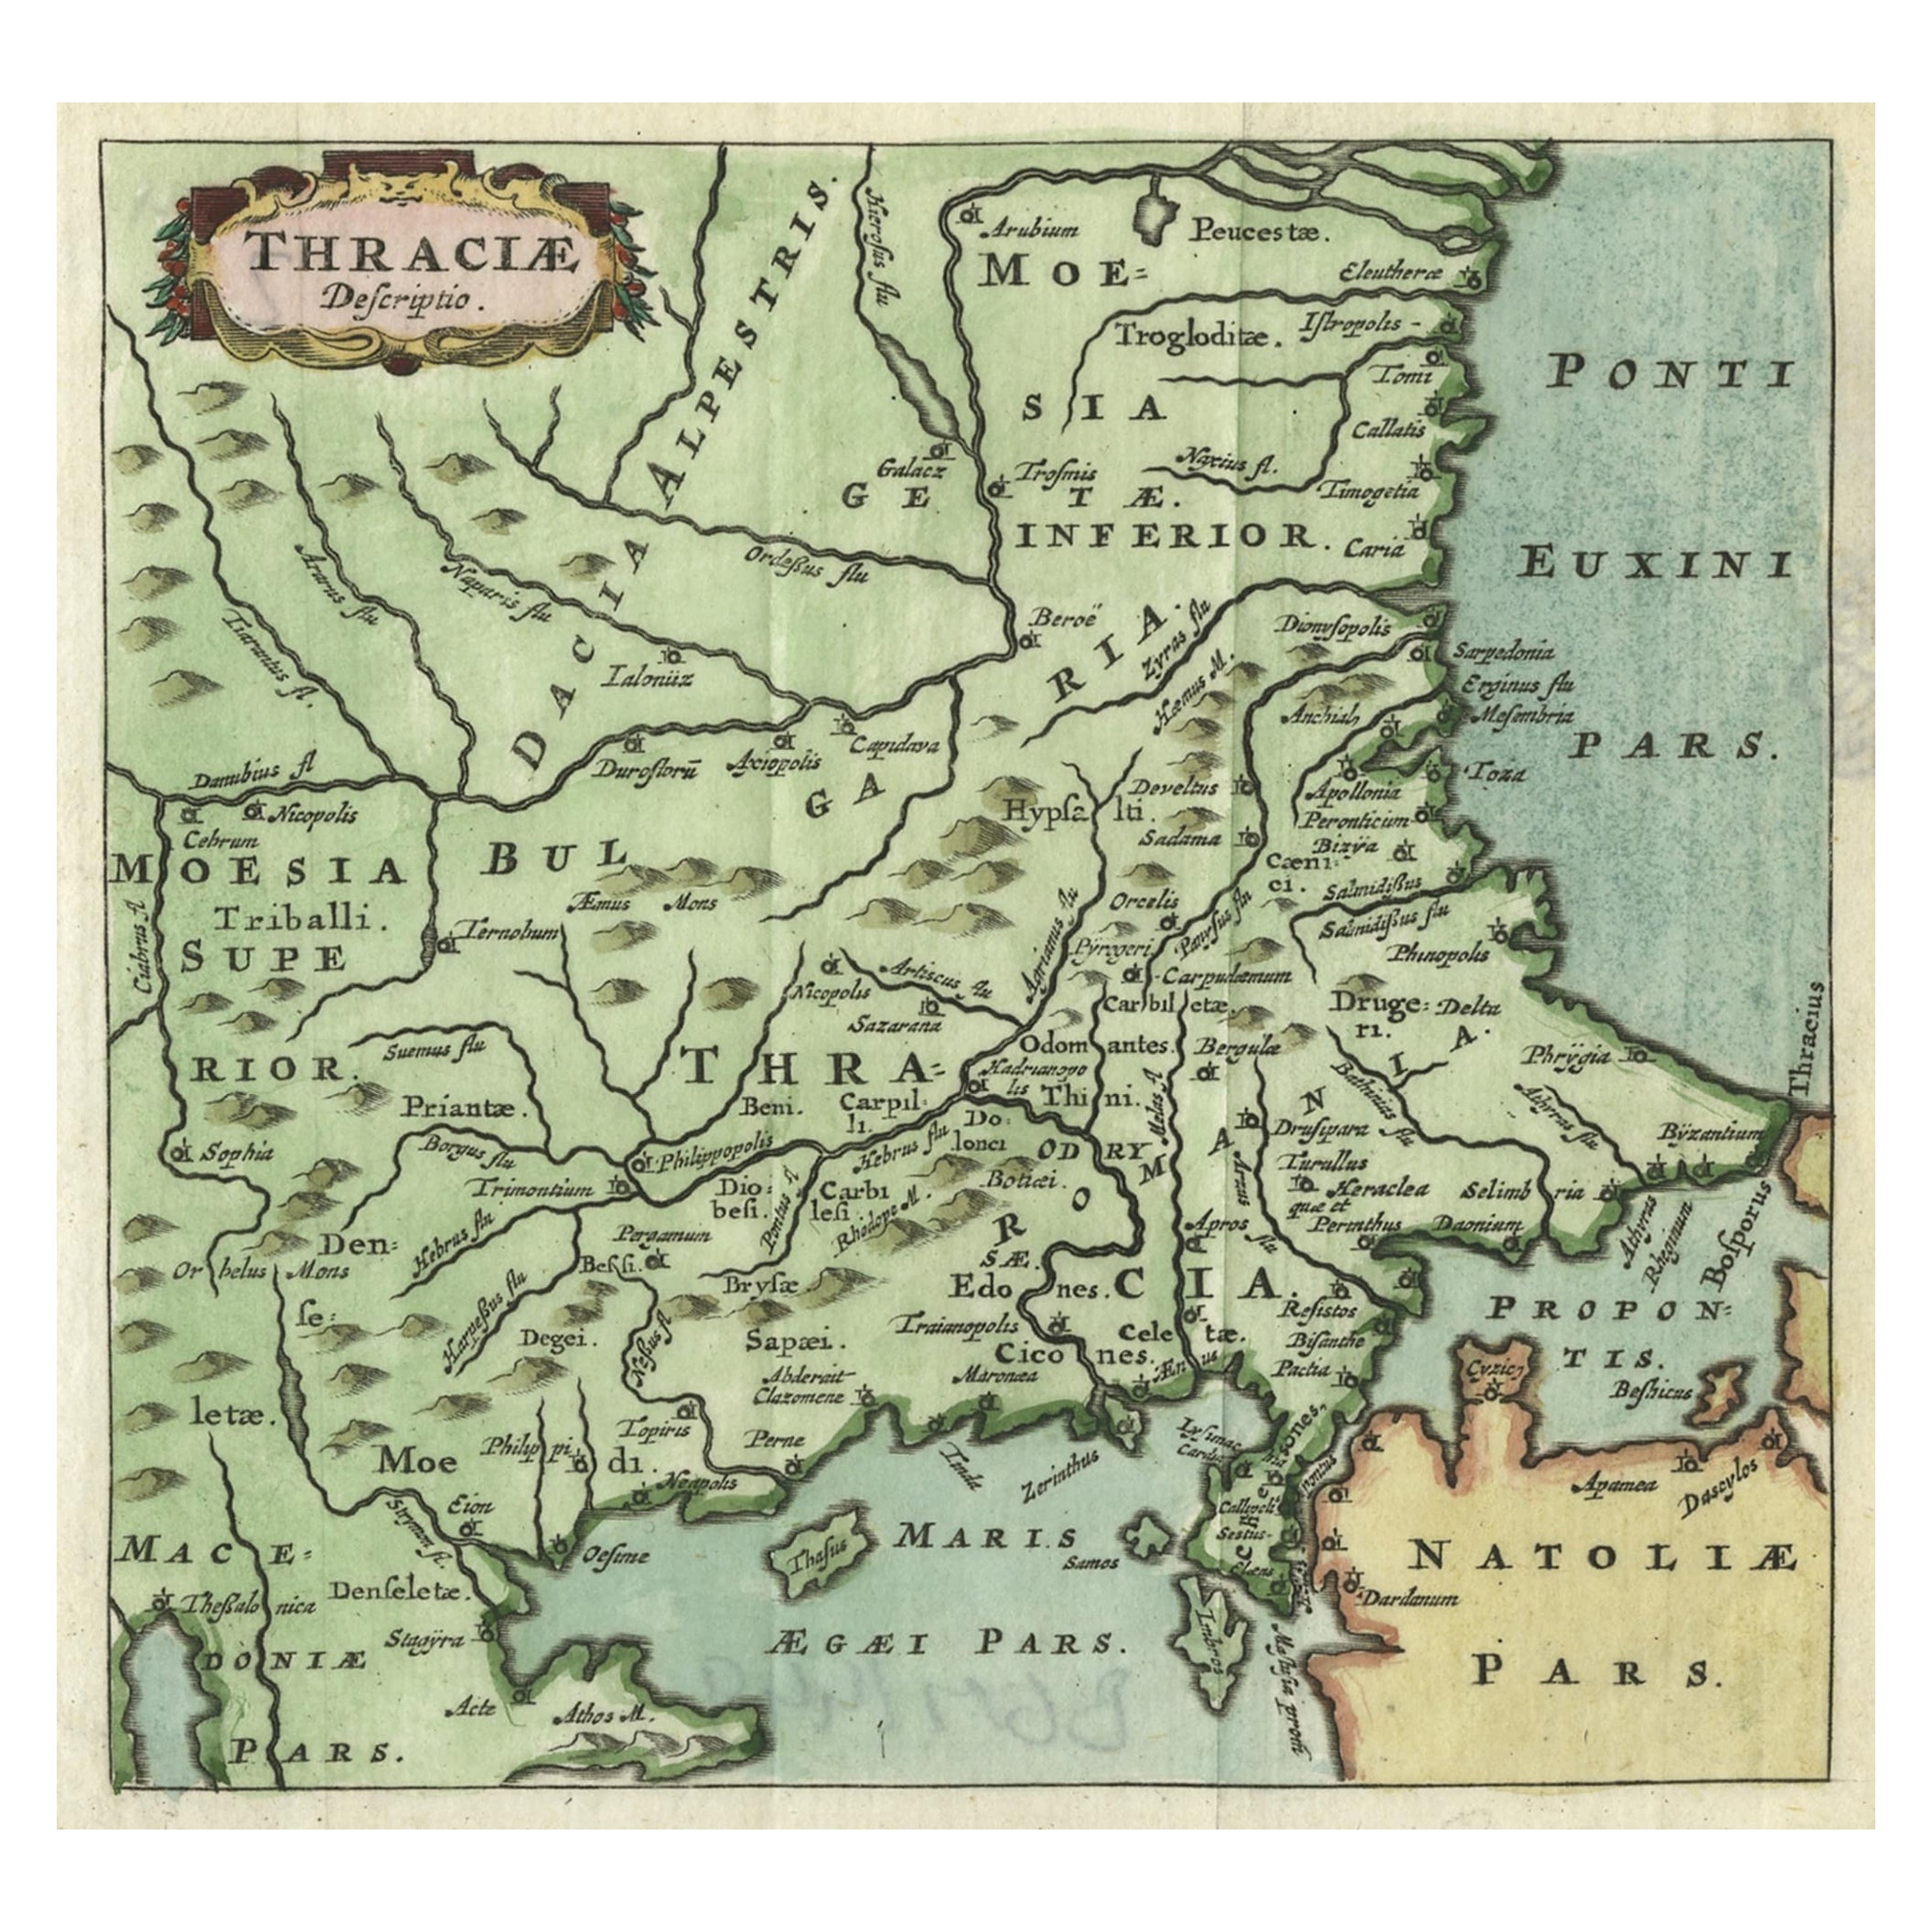 Charming Miniature Map of Thrace or Thrake in Southeast Europe, 1685